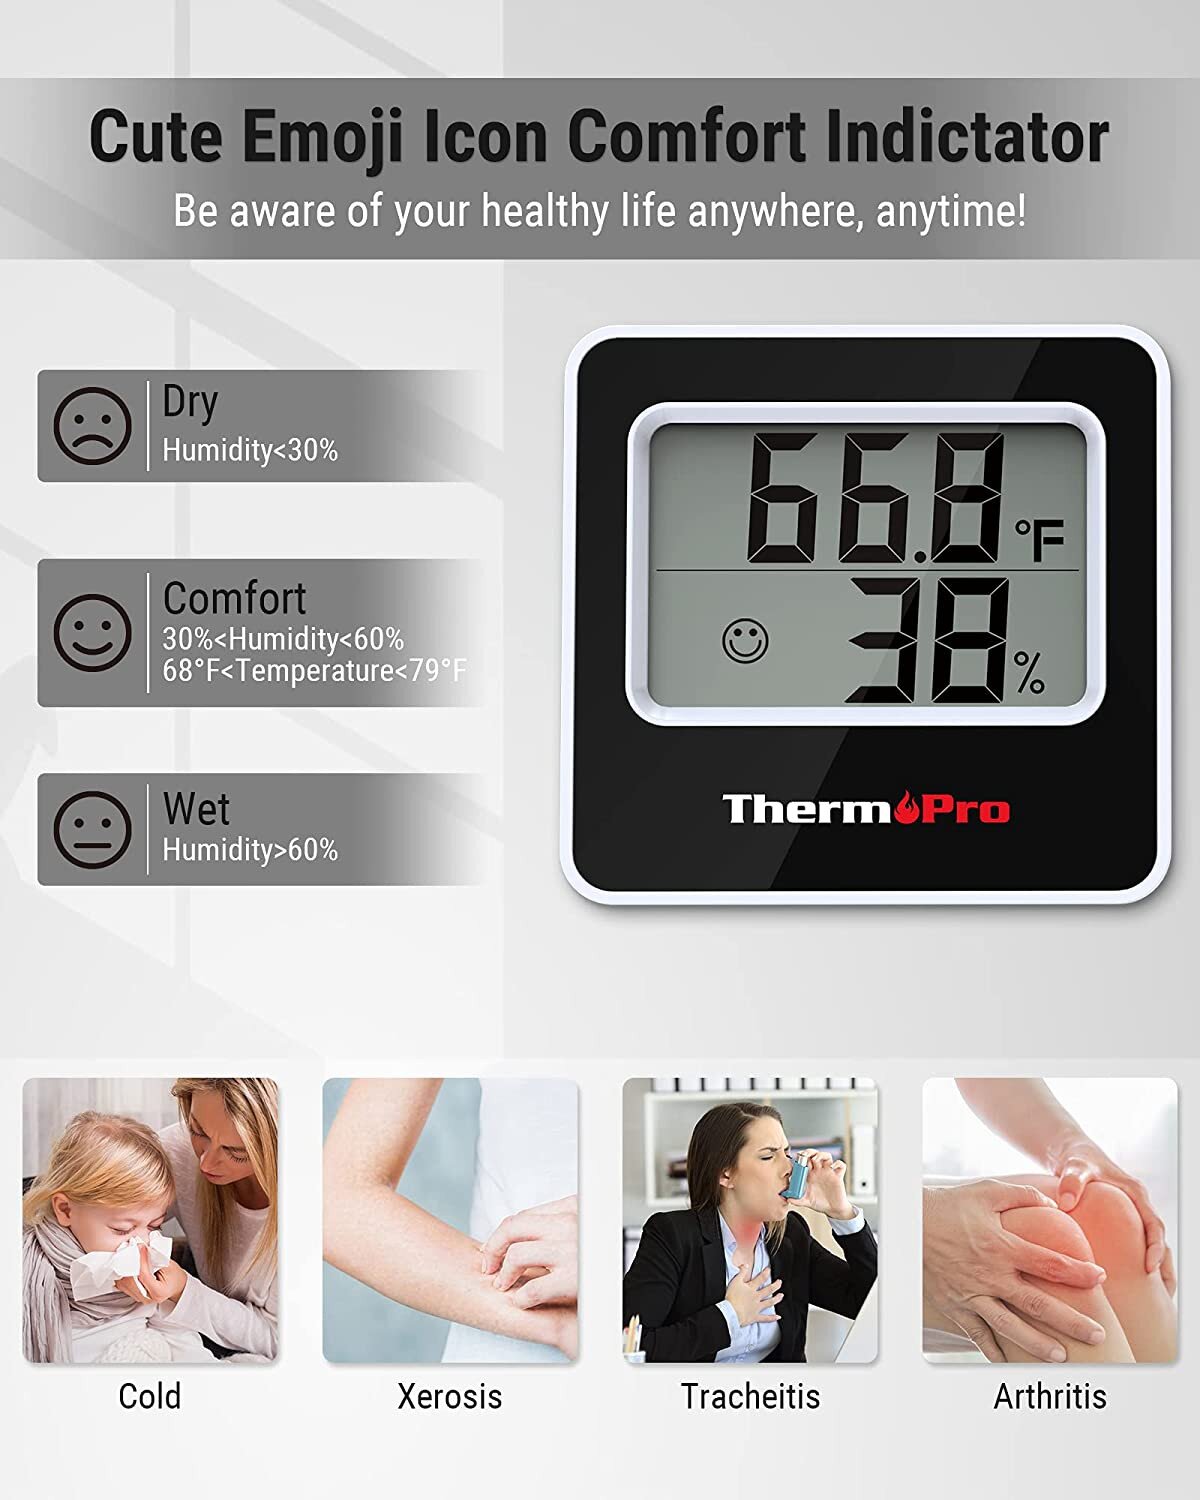 Thermometer / Hygrometer TP49 - Indoor